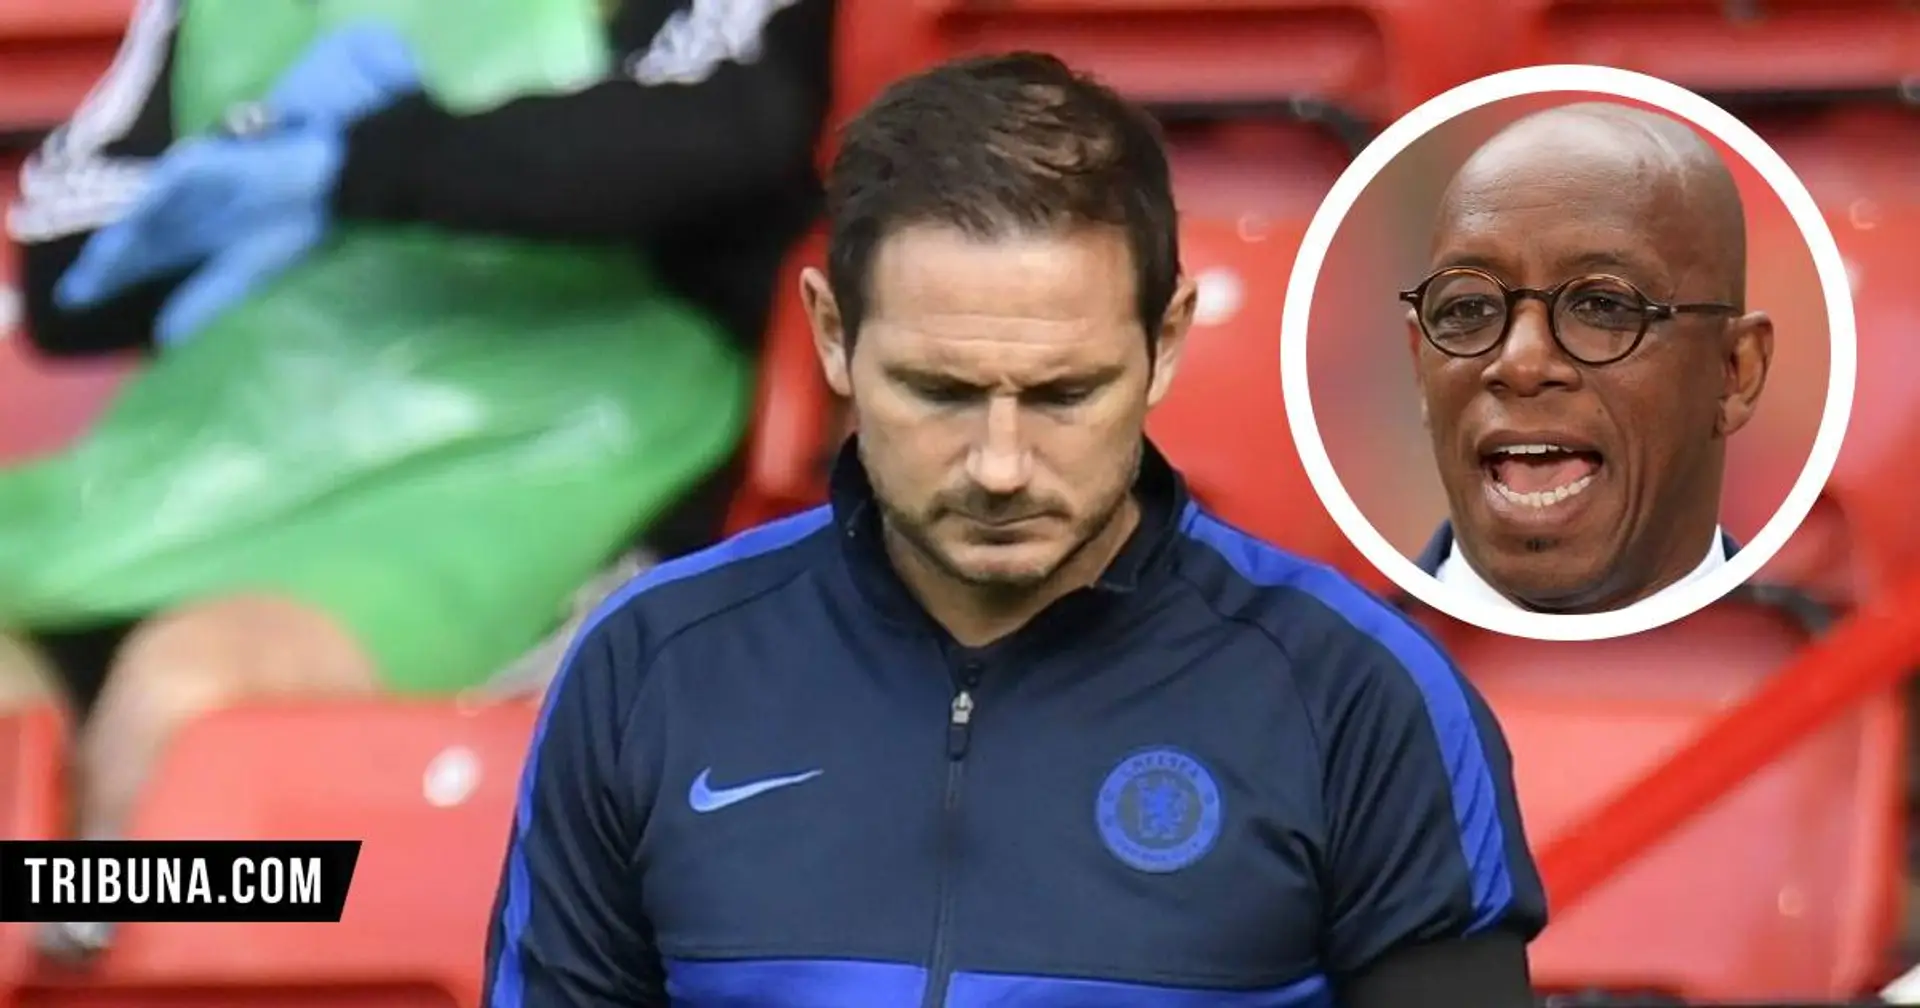 'They lacked Sheffeld's intensity': Ian Wright blasts Lampard and Chelsea's defenders after loss